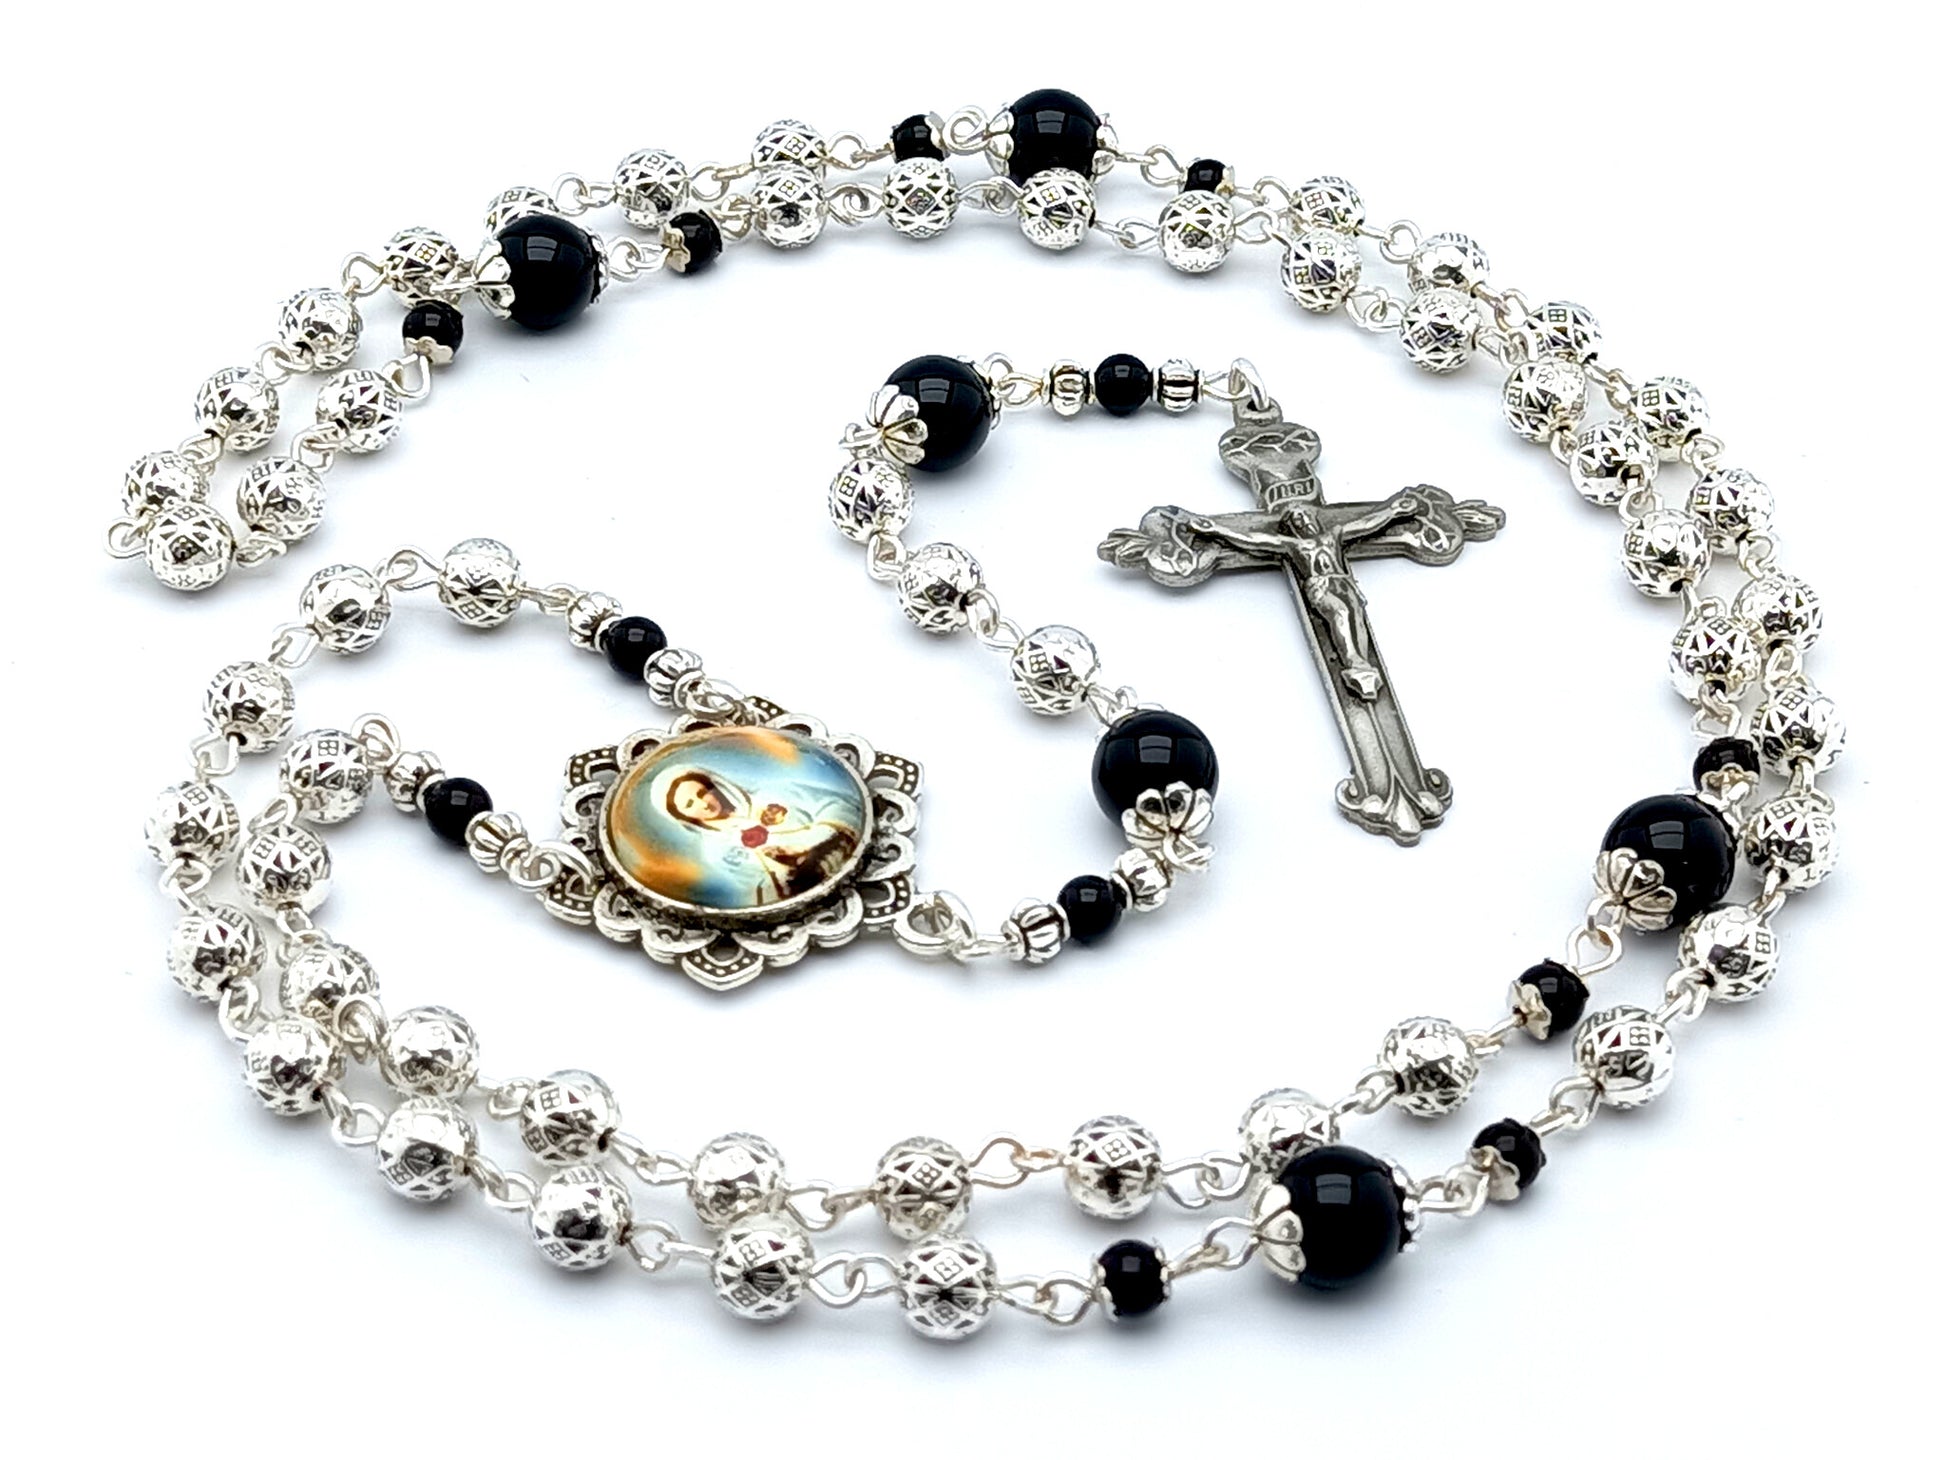 Maria Rosa Mystica unique rosary beads with small silver and onyx gemstone beads, pewter crucifix and silver picture centre medal.